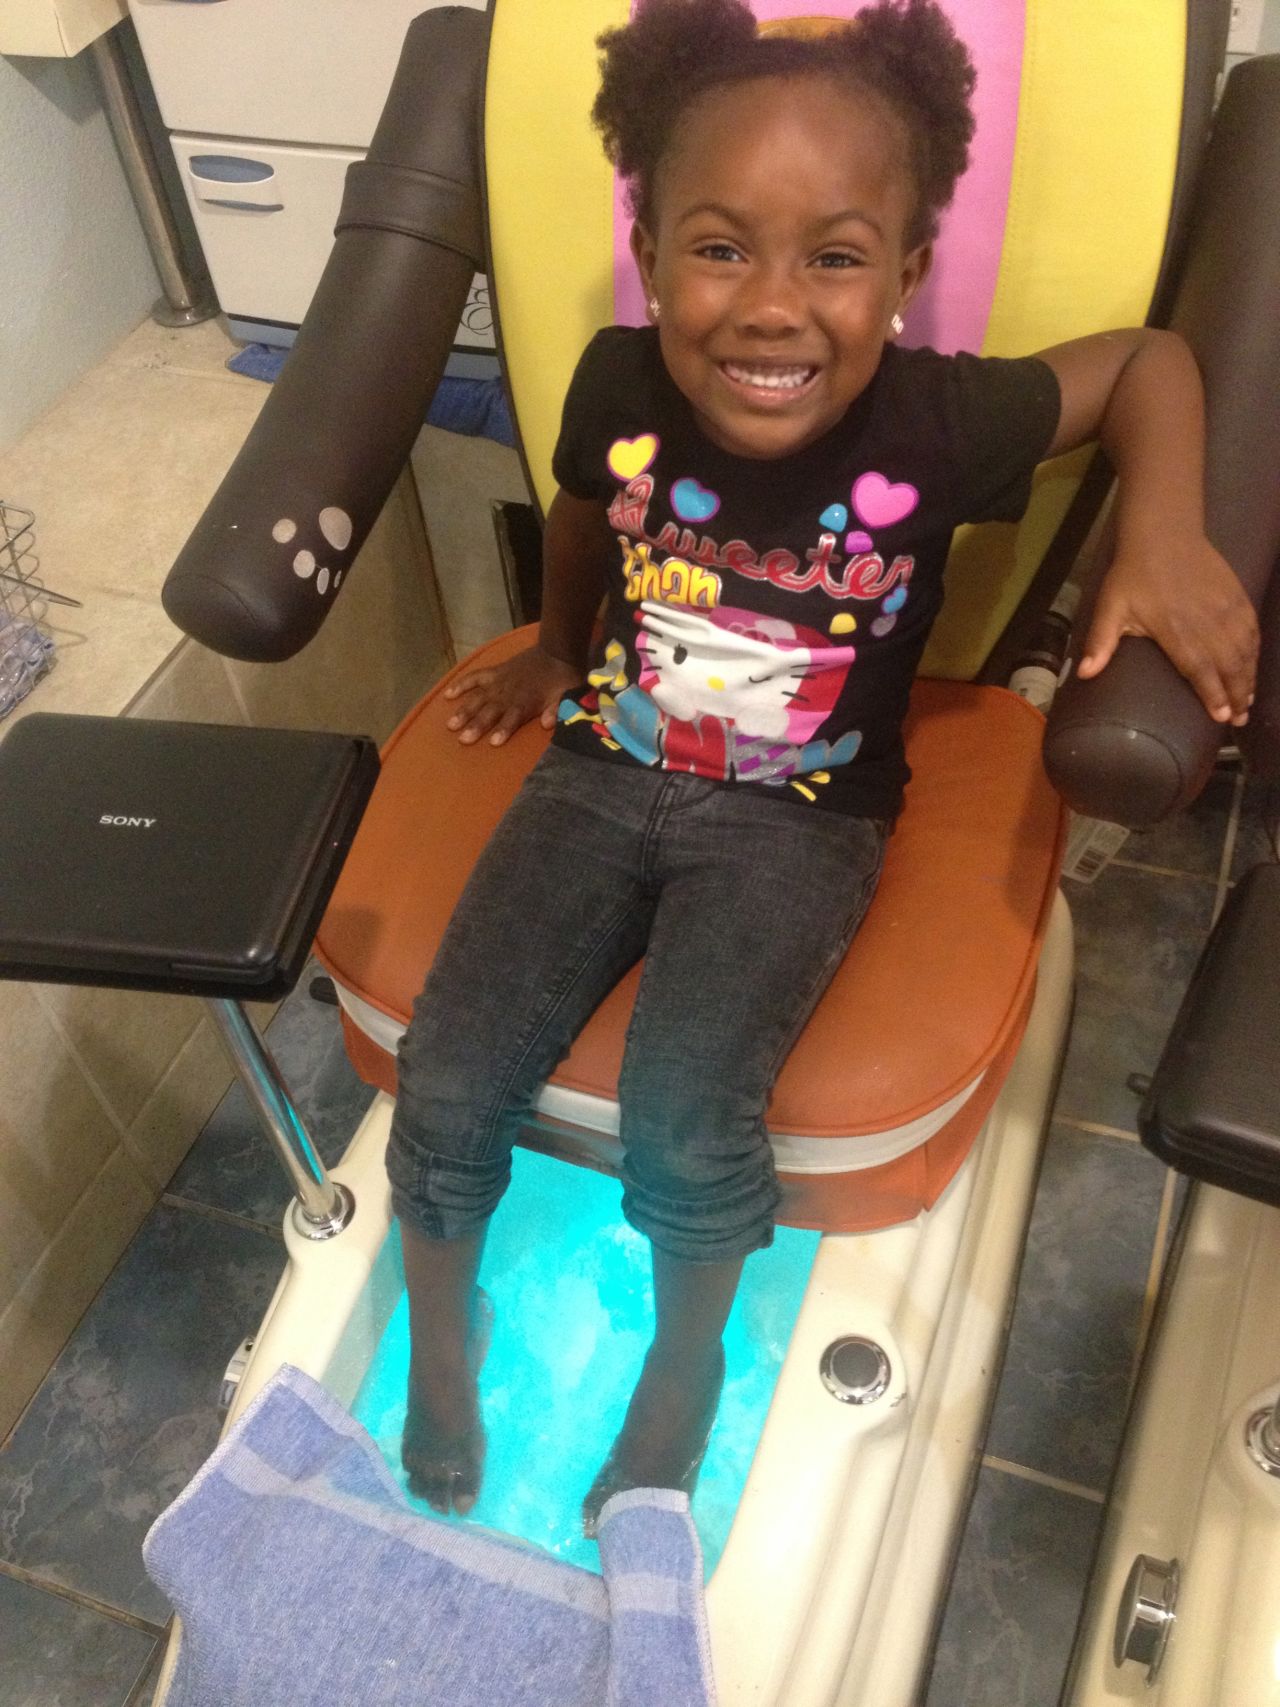 Five-year-old <a href="http://ireport.cnn.com/docs/DOC-983822">Nadiyah Grace</a> earned a pedicure and manicure after being named valedictorian of her graduating class at the Adorable Tots Preschool in Pensacola, Florida. She delivered a speech at the graduation ceremony, telling the crowd, "This has been a great year for me. I have learned a lot. My favorite things to do are read and play games on the iPad. I will have no problems in kindergarten next year."